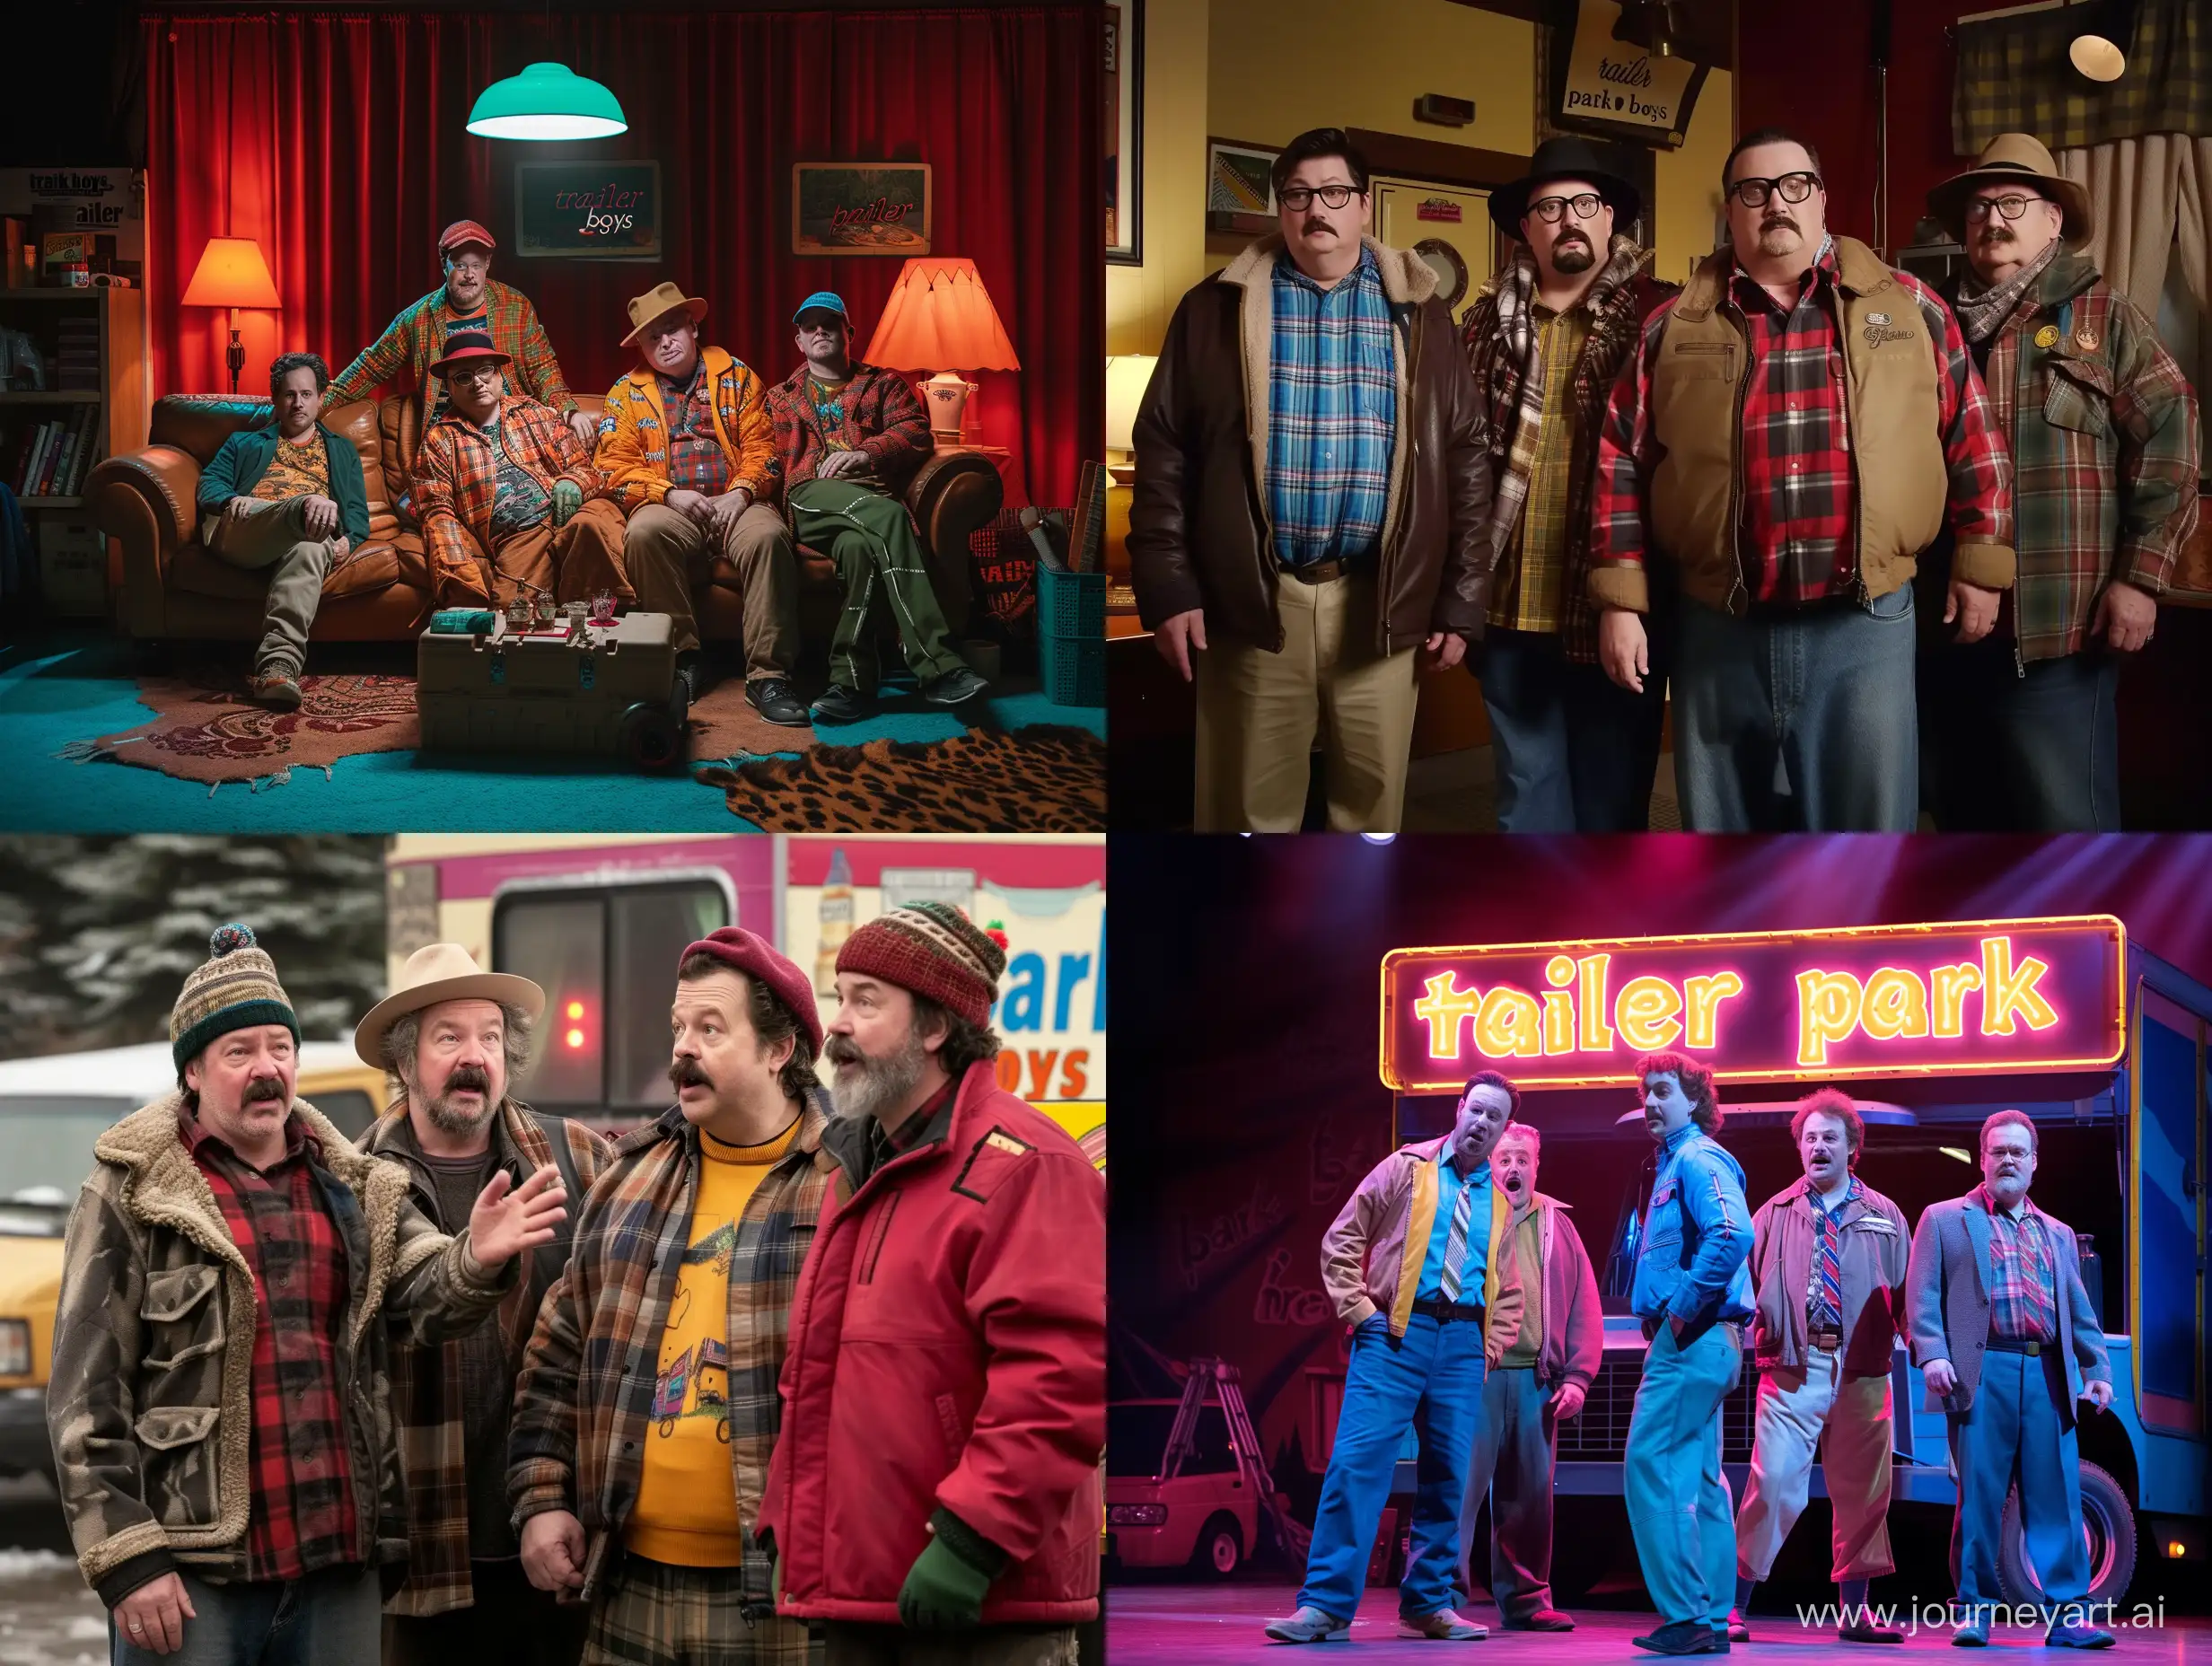 the Canadian tv show “trailer park boys” reimagined as a Broadway musical — stylize 250